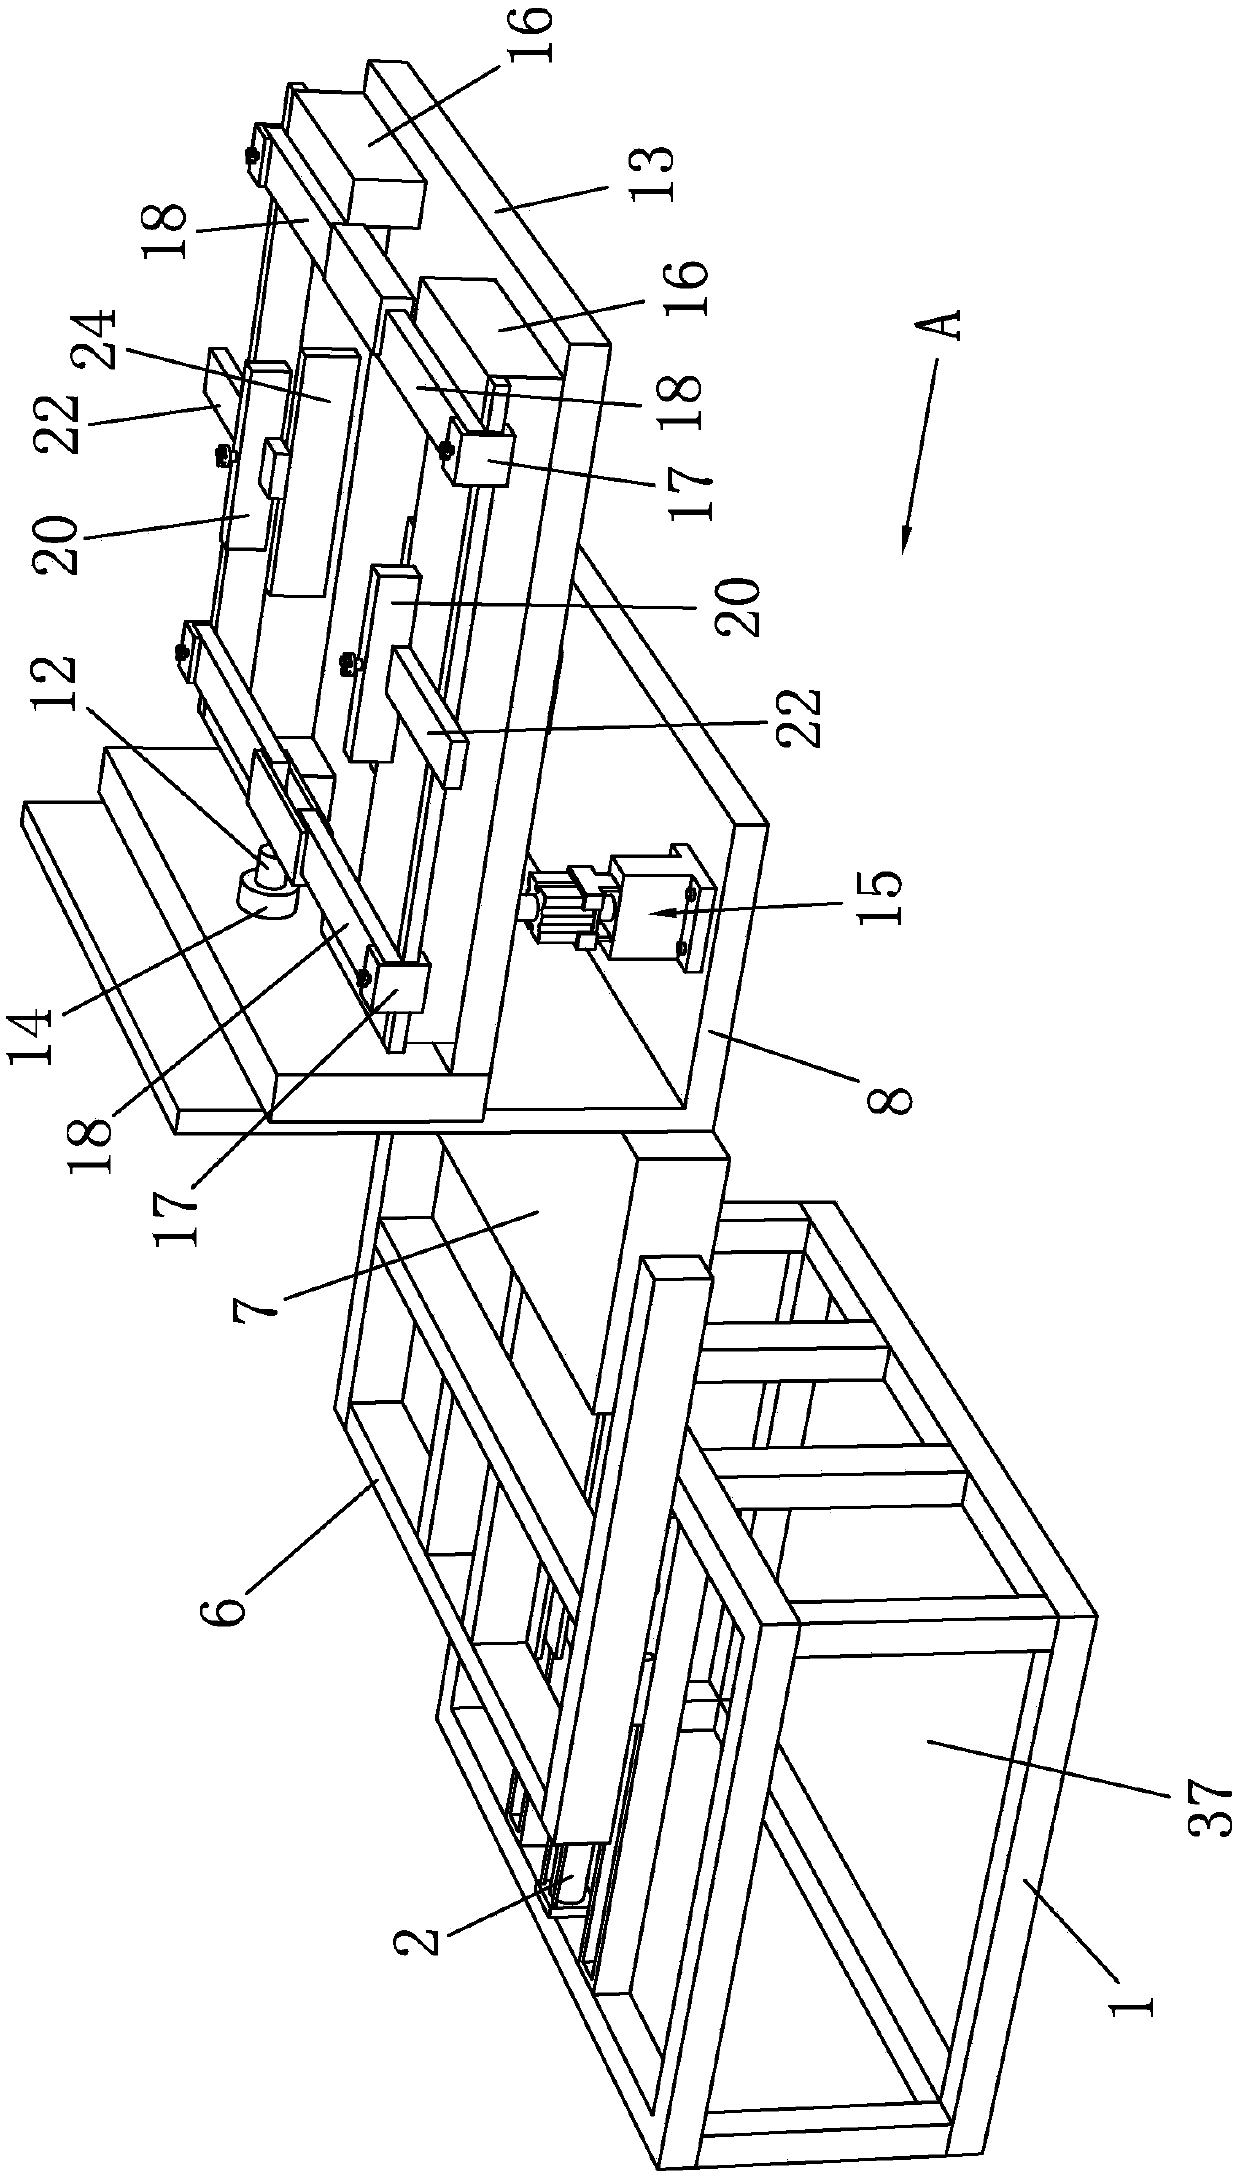 Positioning adjustment device for automatic labeling of carton